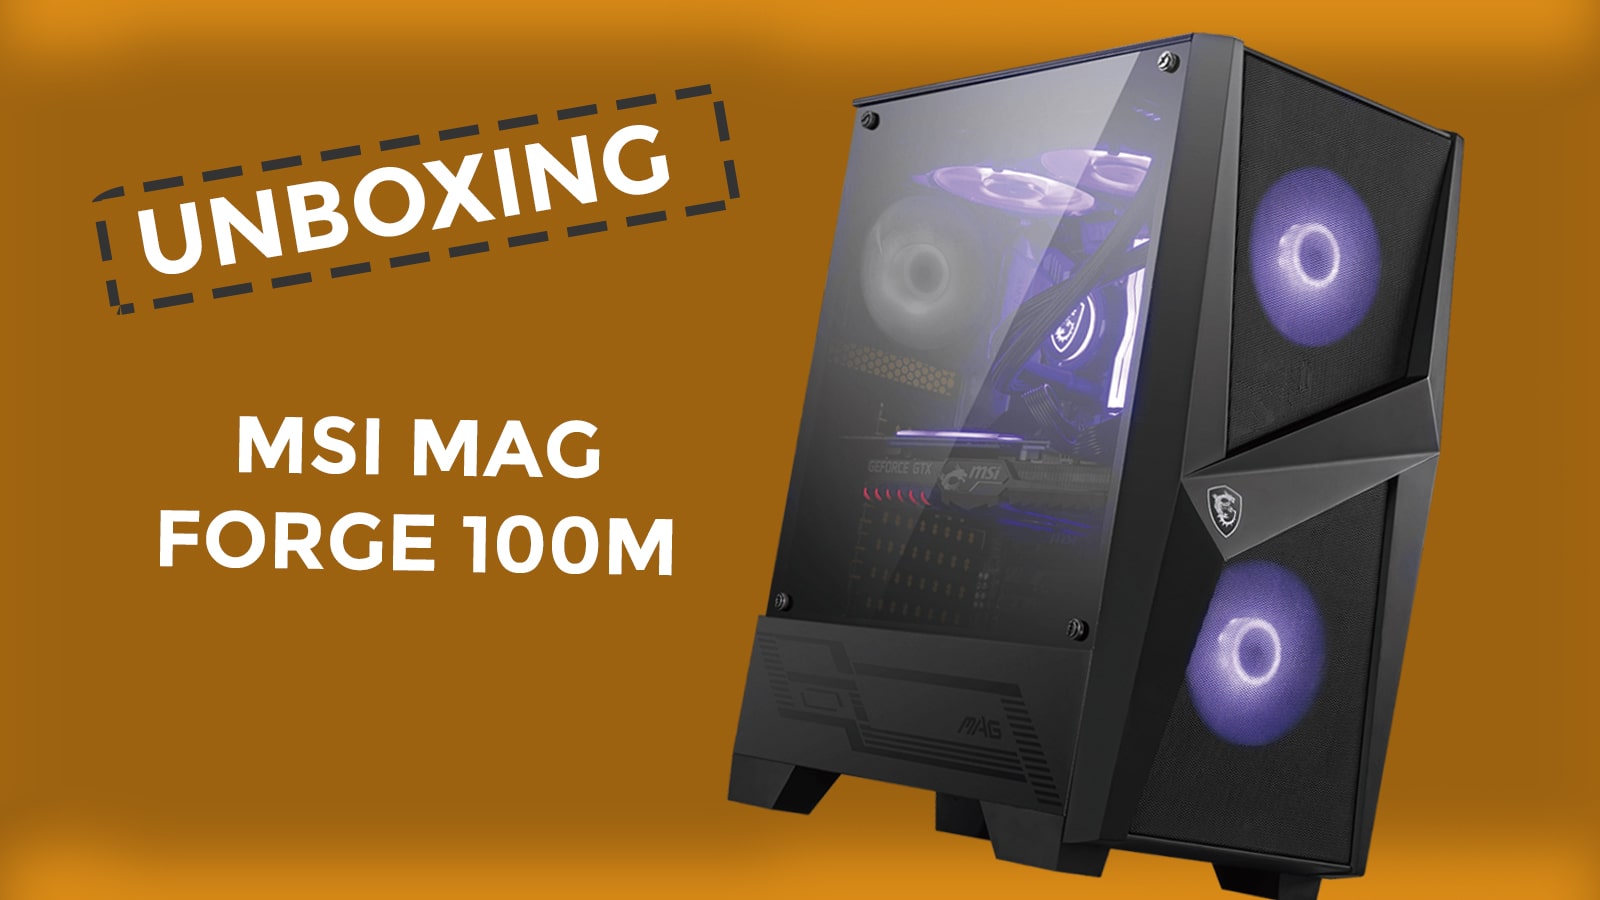 MSI Mag Forge 100m unboxing